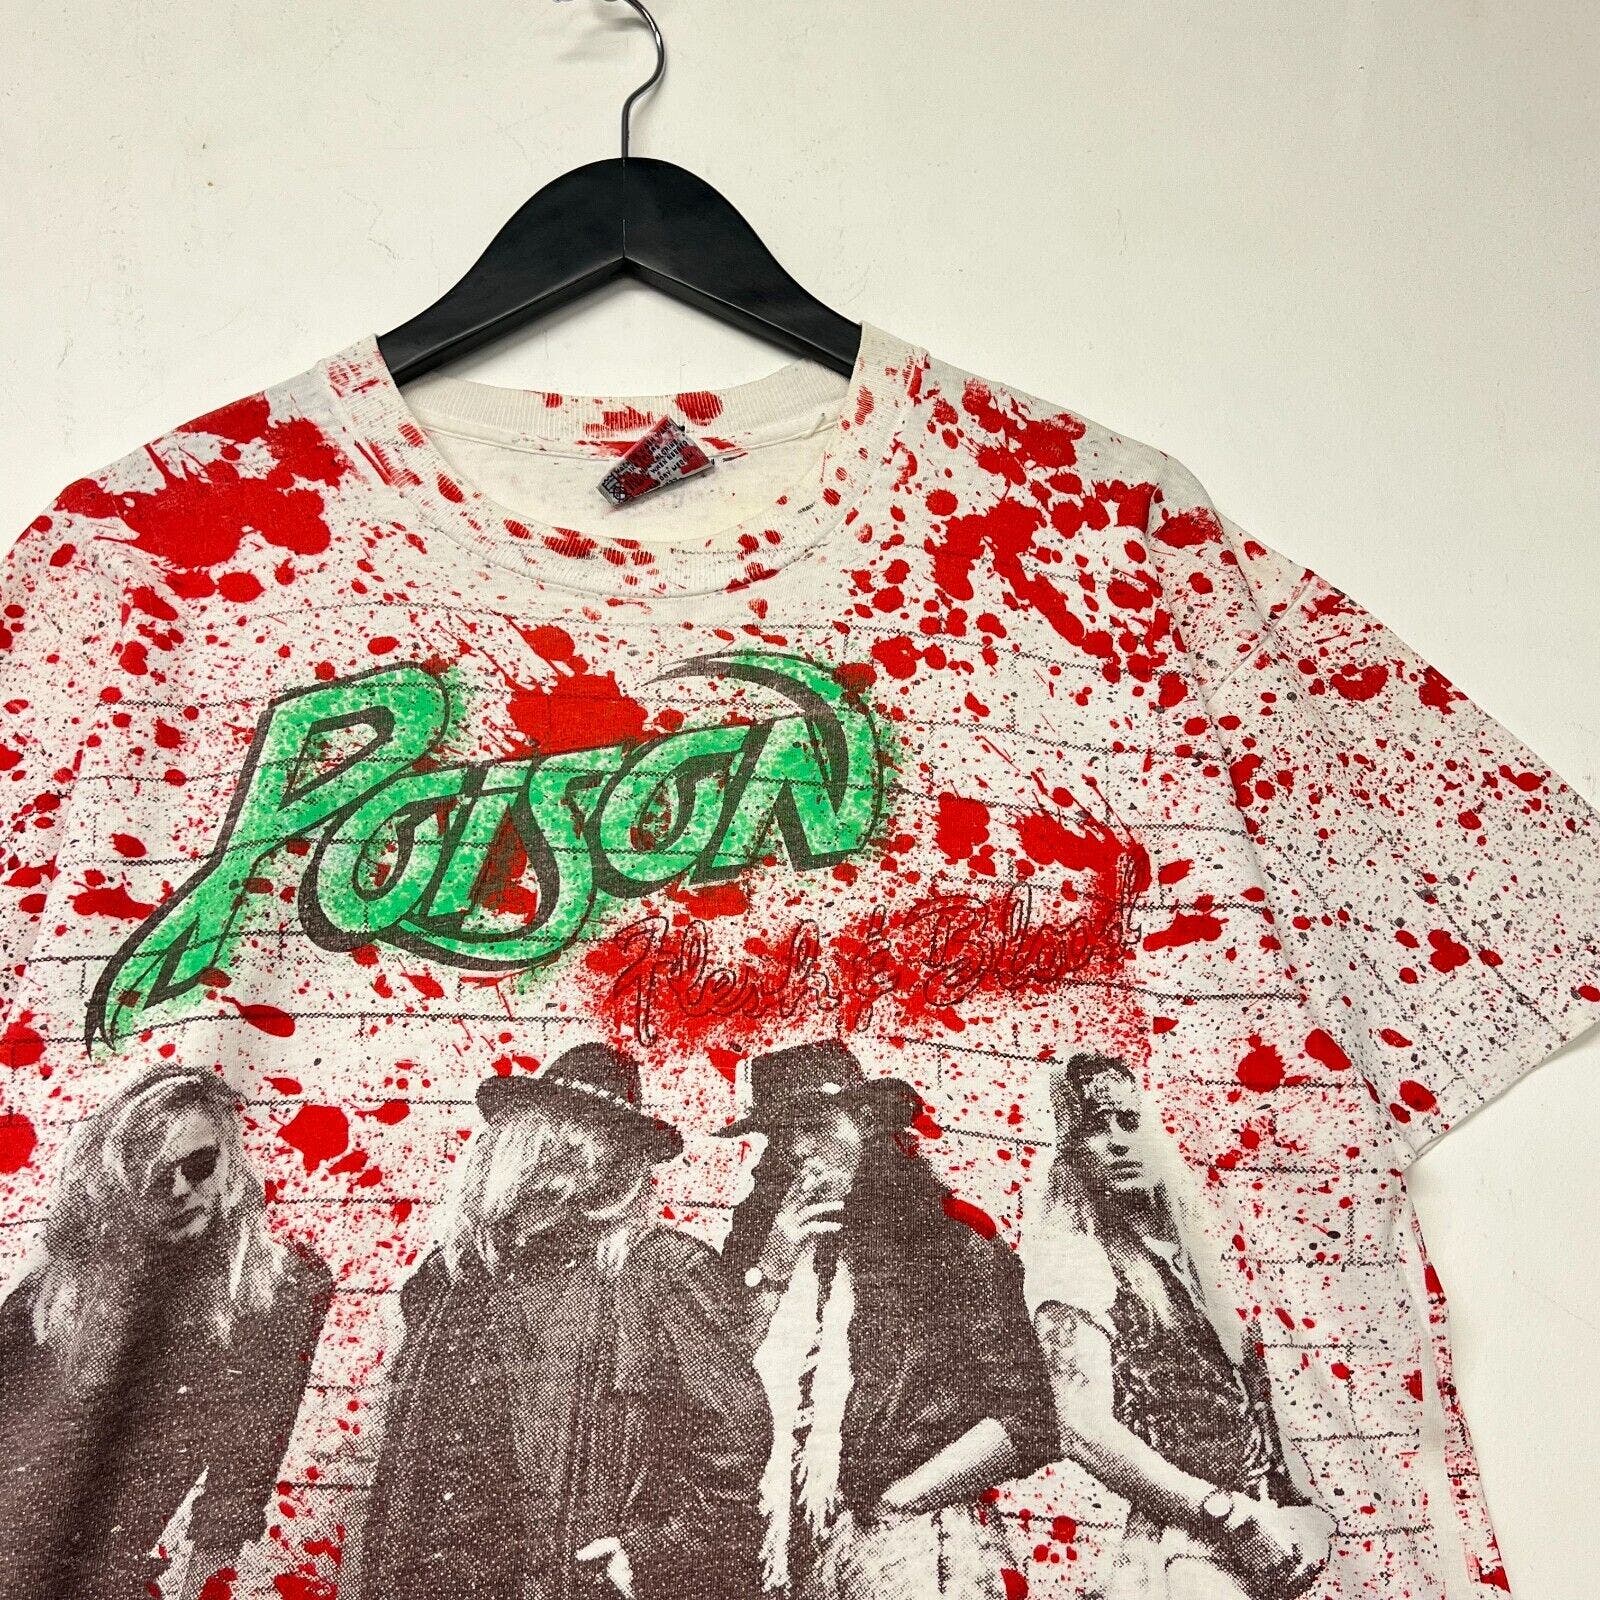 Vintage Poison Band White and Red T-shirt Size L 90s Flesh and Blood AoP